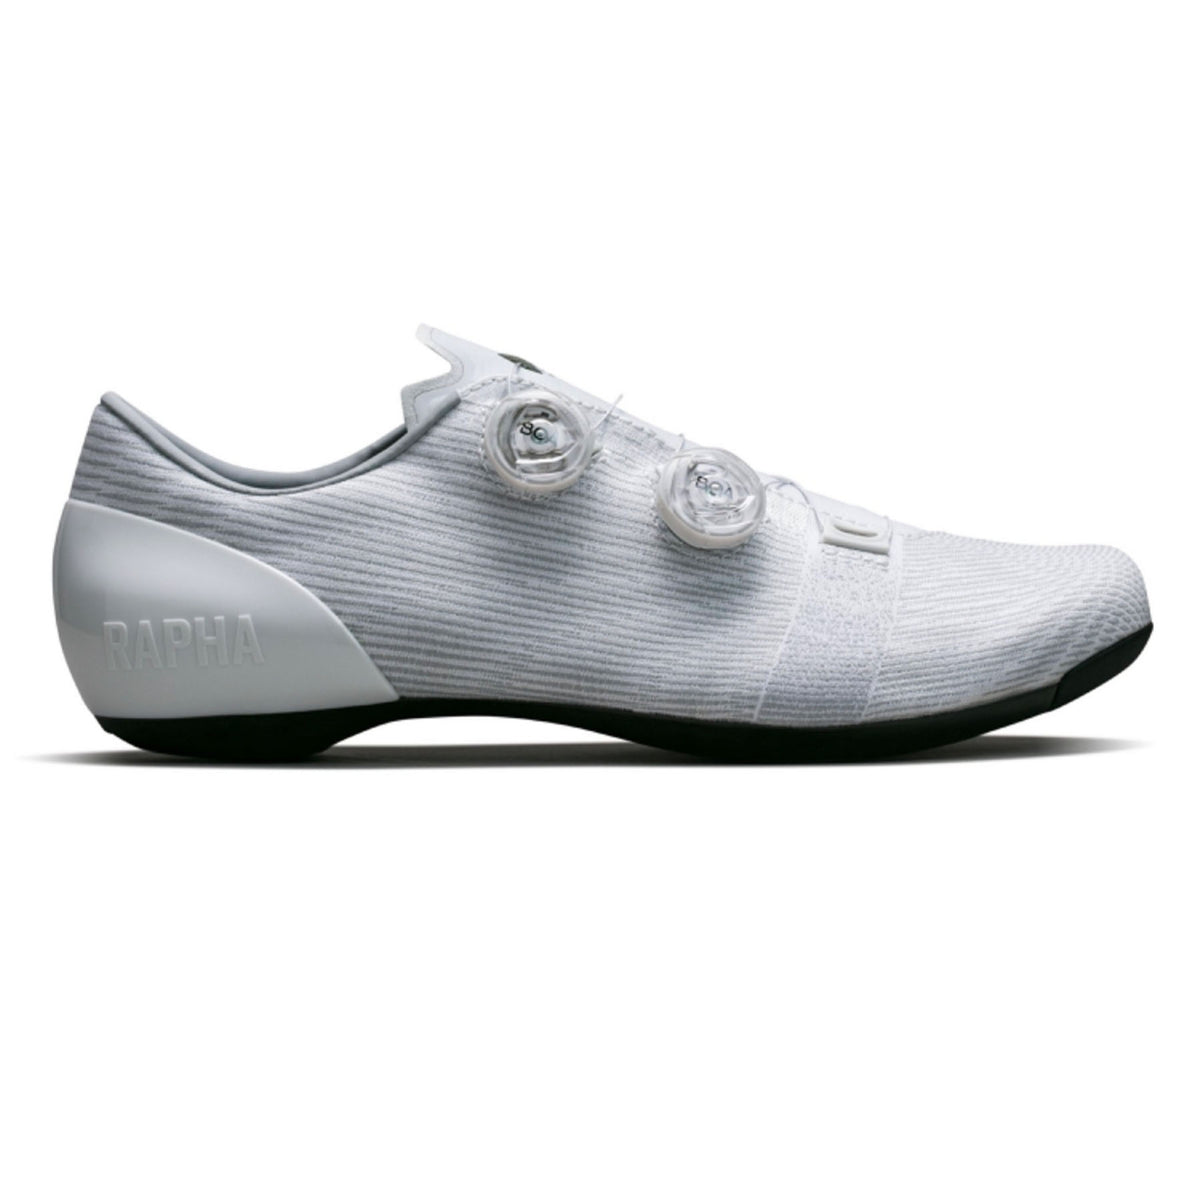 Hero image featuring the side of the Rapha Pro Team Shoes in light grey.